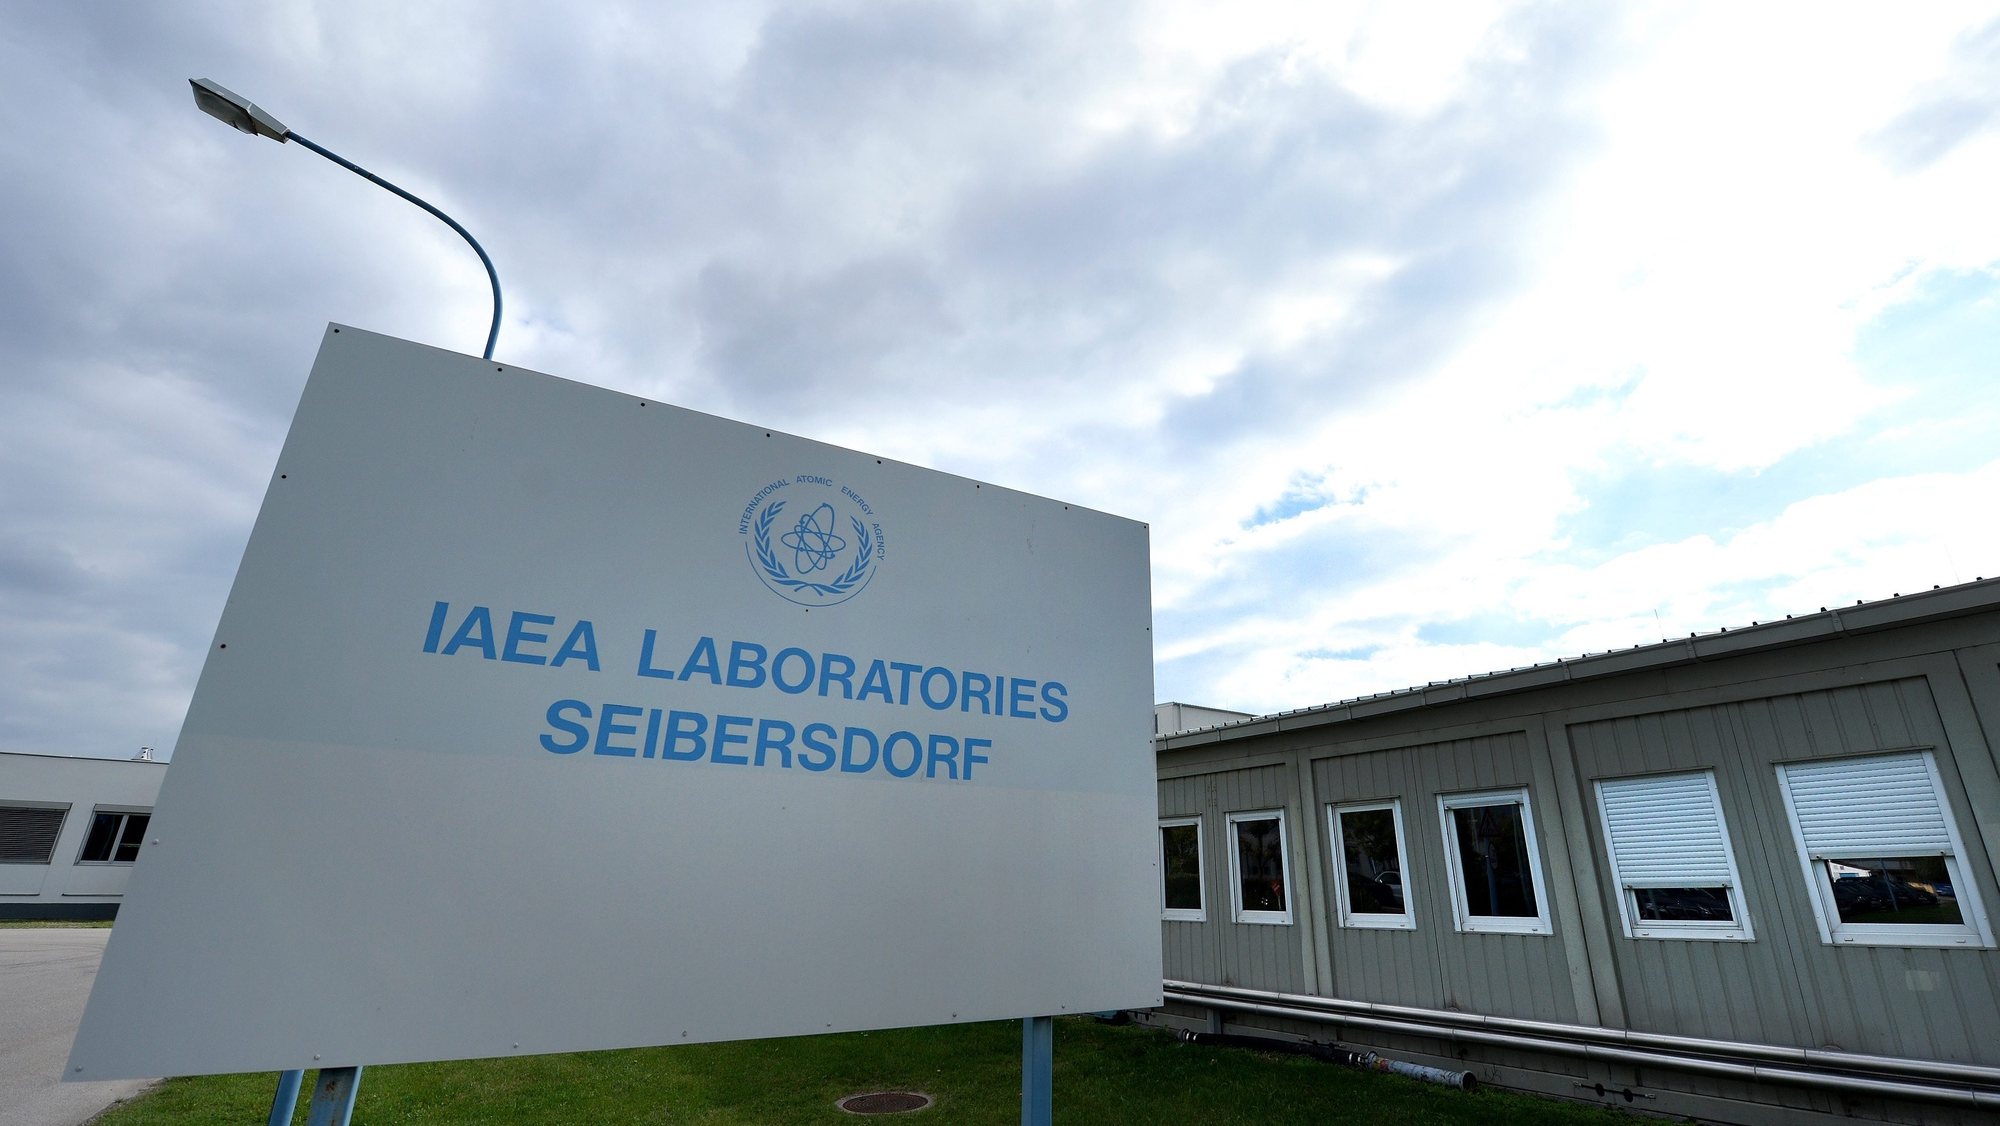 epa03880875 The entrance to the International Atomic Energy Agency&#039;s (IAEA) new nuclear Material Laboratory at the Agency&#039;s Seibersdorf facility in Seibersdorf, Austria, 23  September 2013. The laboratory is an essential component of the Agency&#039;s safeguards activities, as it analyses material sampled by safeguards inspectors from nuclear fuel cycle processes. The new building, which began construction in 2011, replaces an aging building which no longer meets the needs of the IAEA.  EPA/ROBERT JAEGER